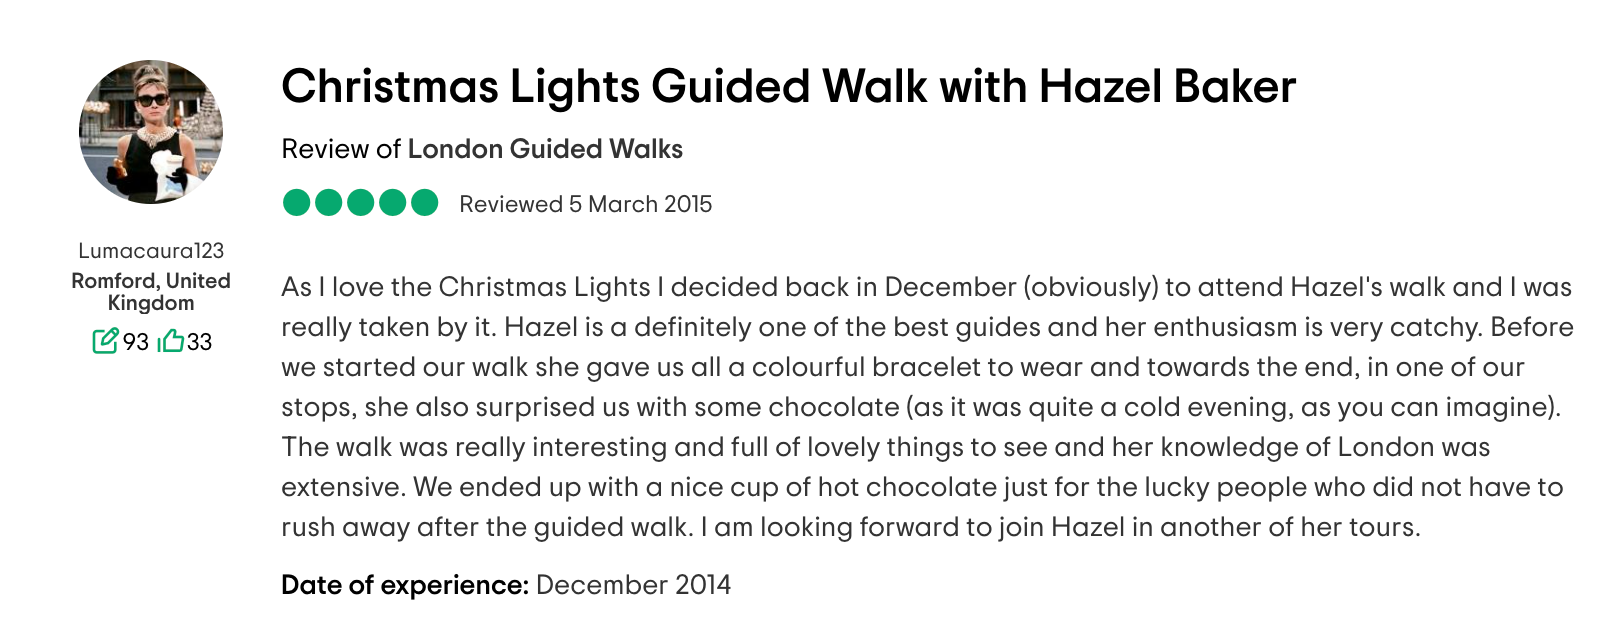 The Best Walking Tours in London at Christmas - London Guided Walks